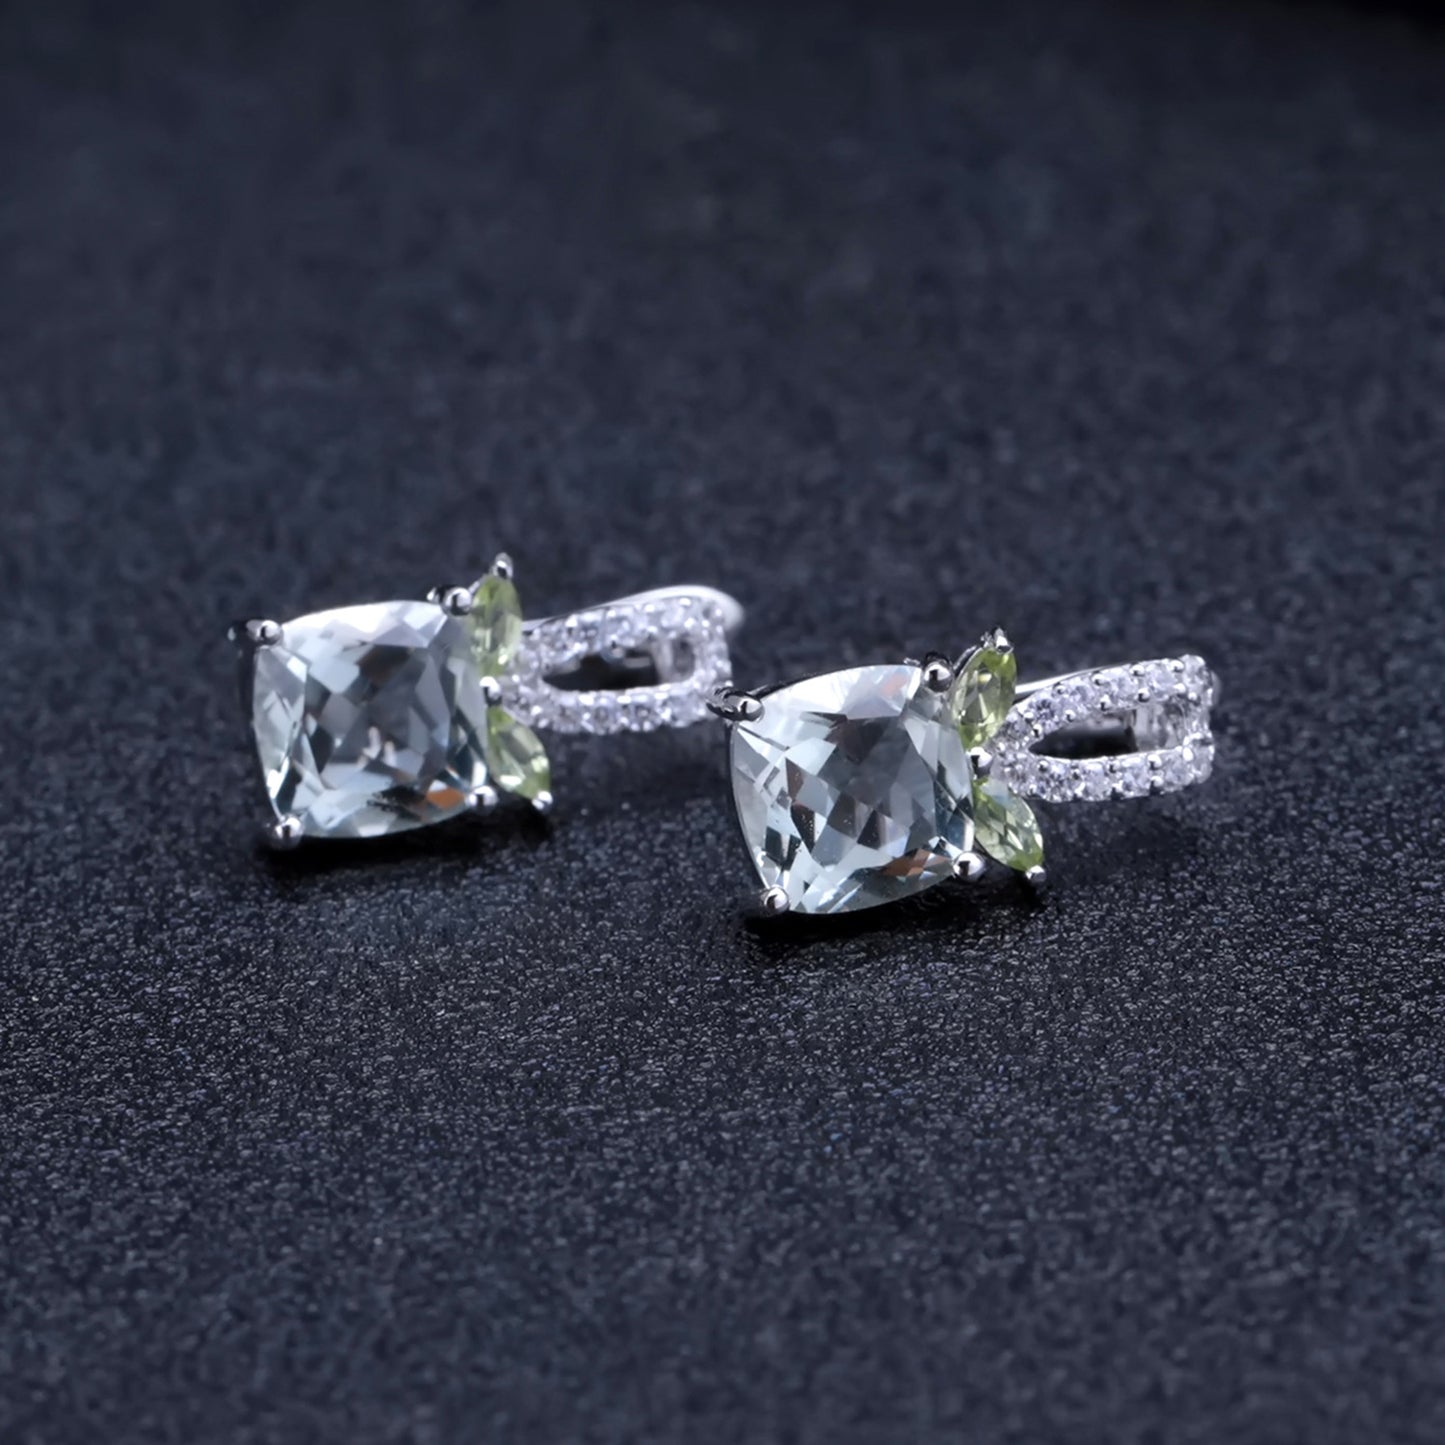 Fashion Luxurious Design Inlaid Natural Green Crystal Square Silver Studs Earrings for Women